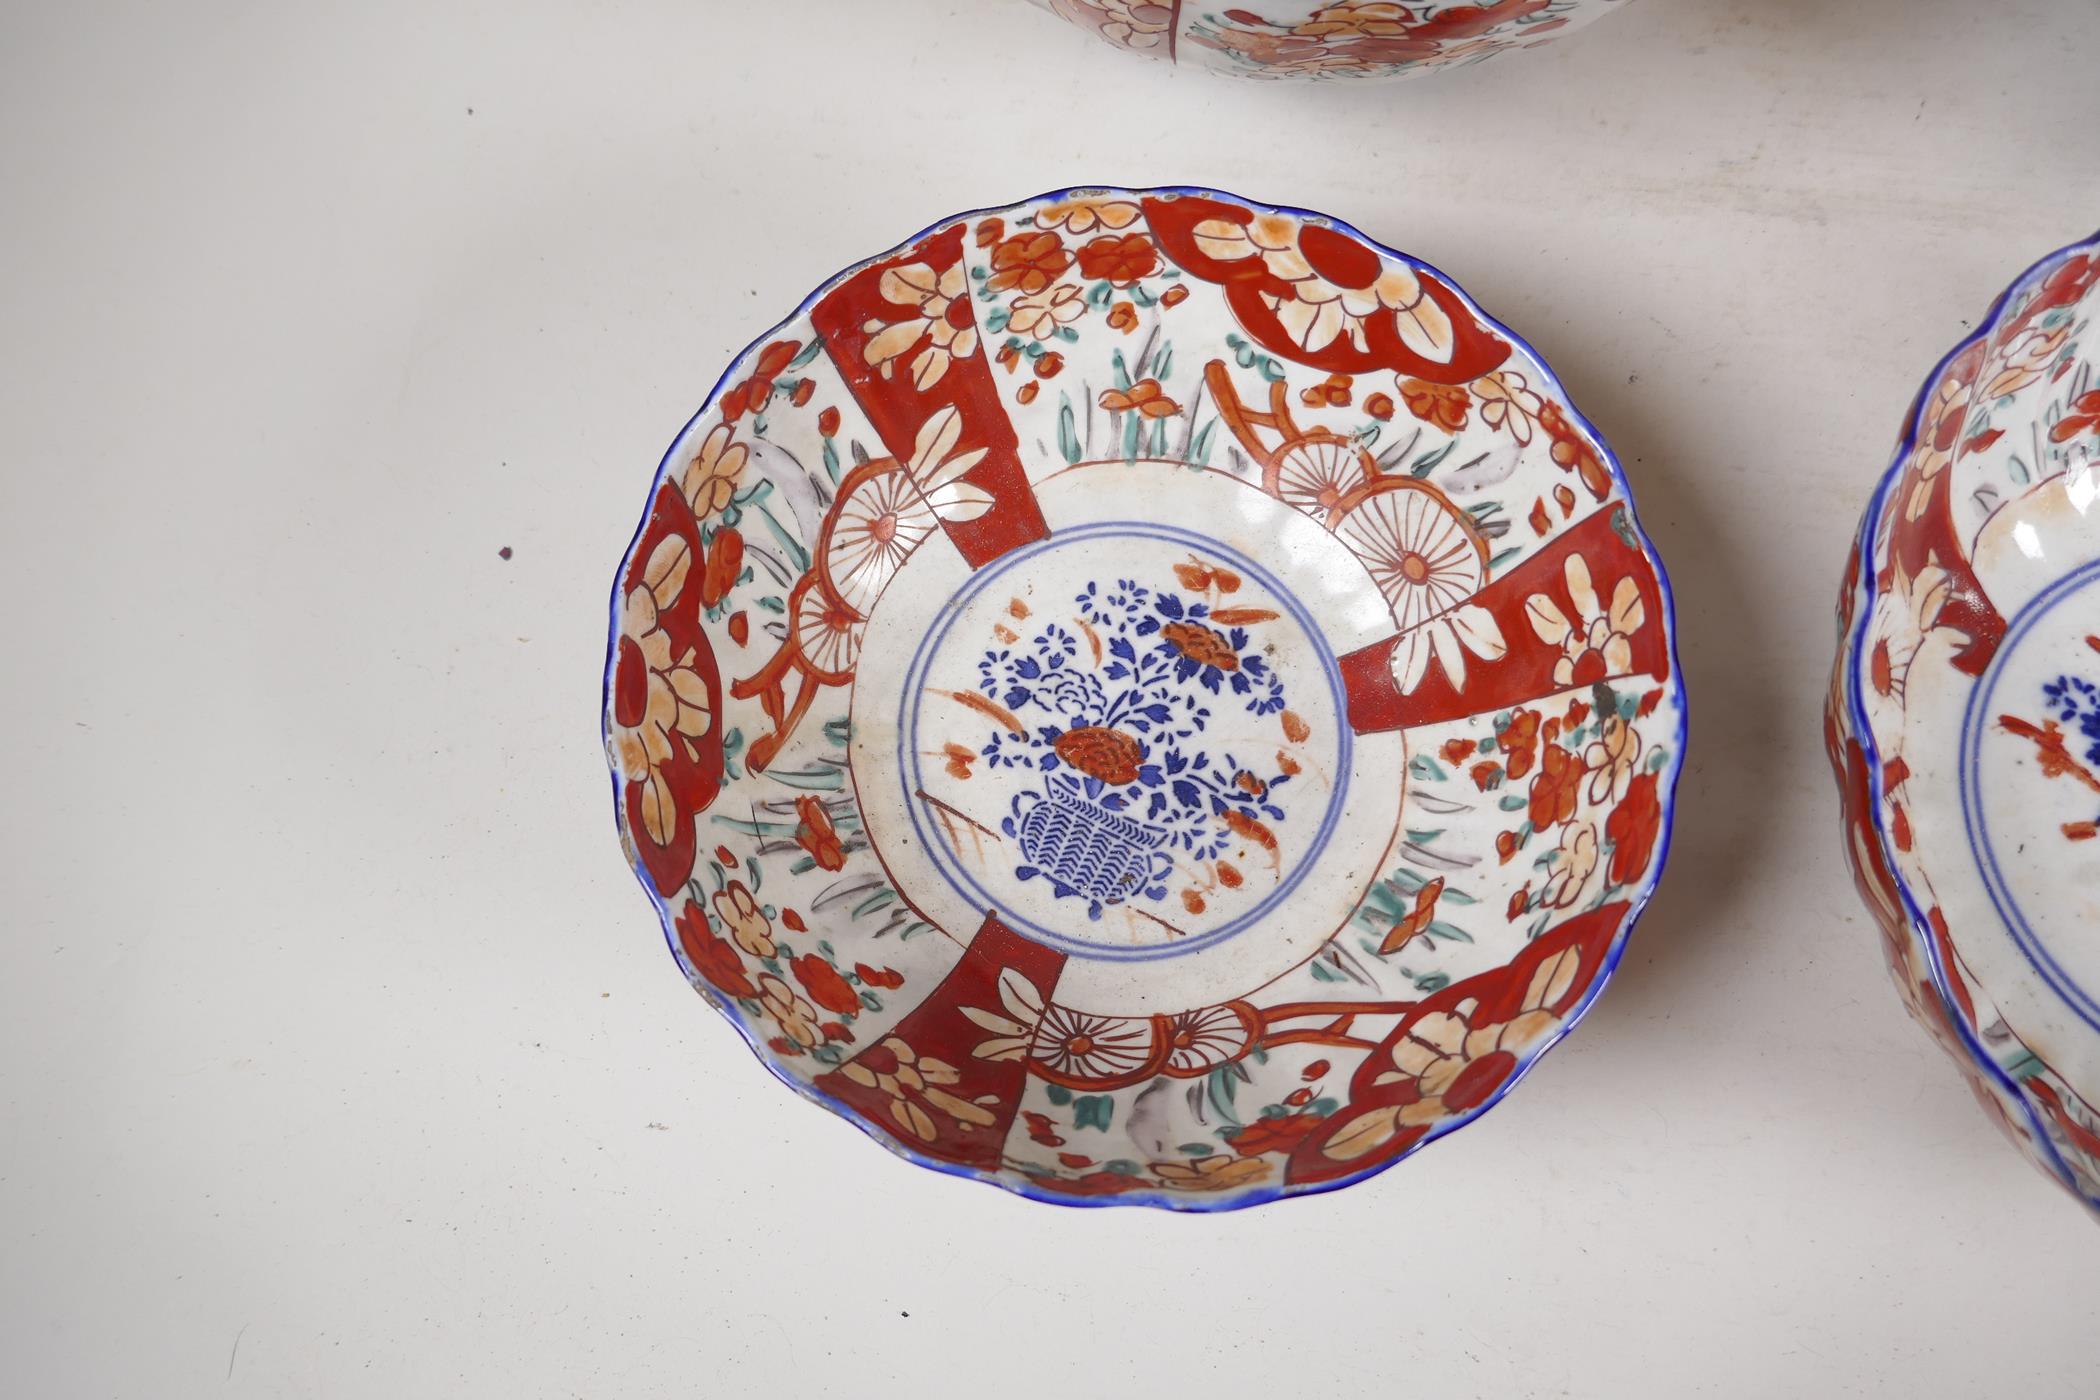 Four C19th Imari porcelain bowls decorated with traditional patterns, largest 10" diameter - Image 5 of 5